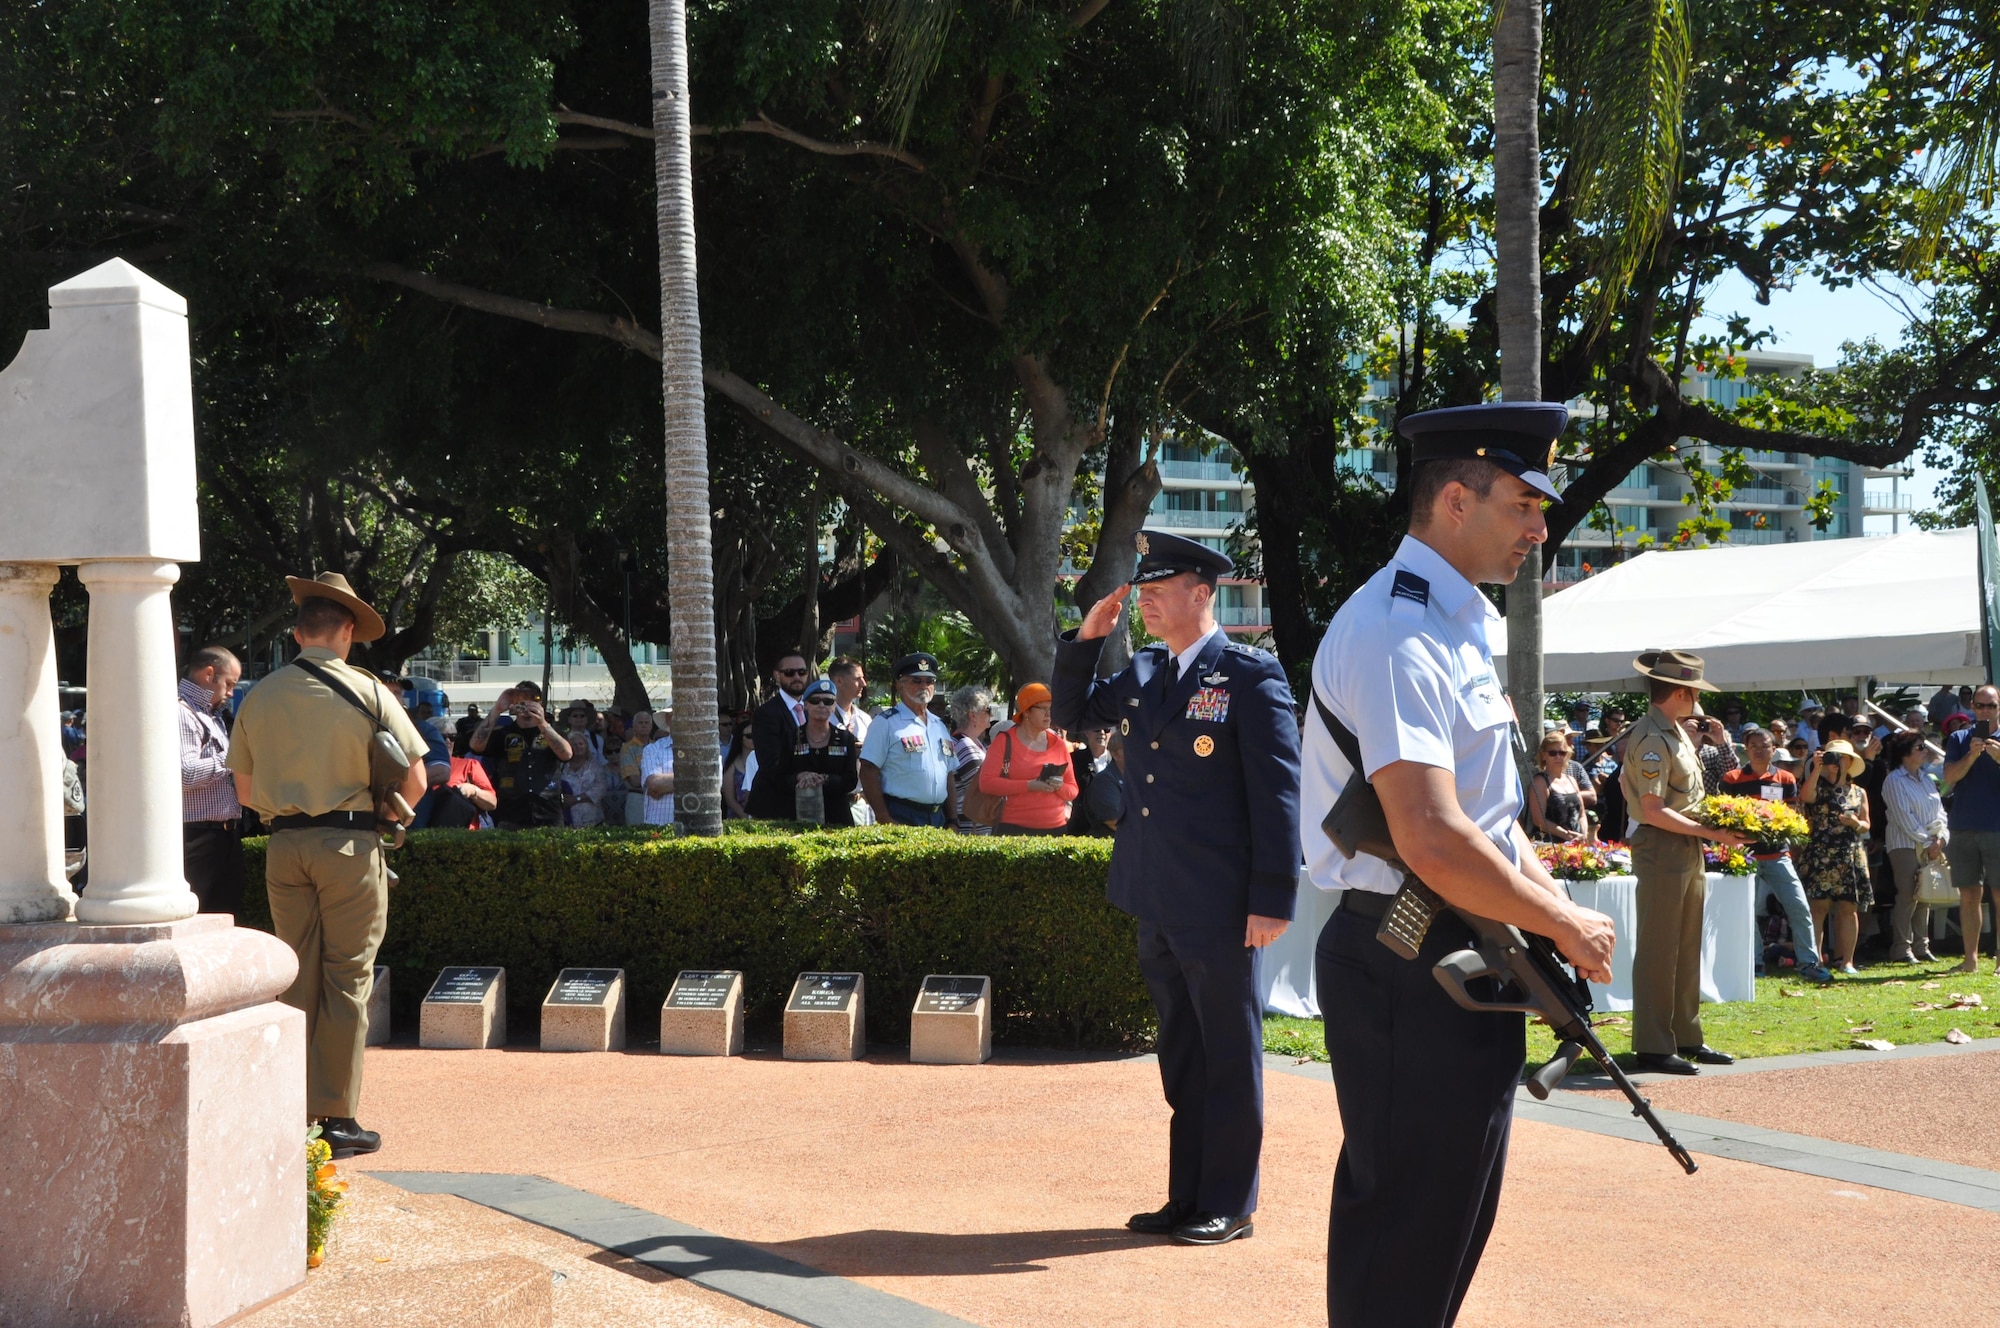 Lt. Gen. John Dolan, Commander, 5th Air Force, salutes after placing a wreath at the base of the War Memorial in ANZAC Park during the Townsville, Australia VP70 Memorial Service Aug 15, 2015. The service honored all those who gave their lives in the defense of their country and led to victory in the Pacific 70 years ago.  (U.S. Air Force photo by Capt. George M. Tobias/Released)